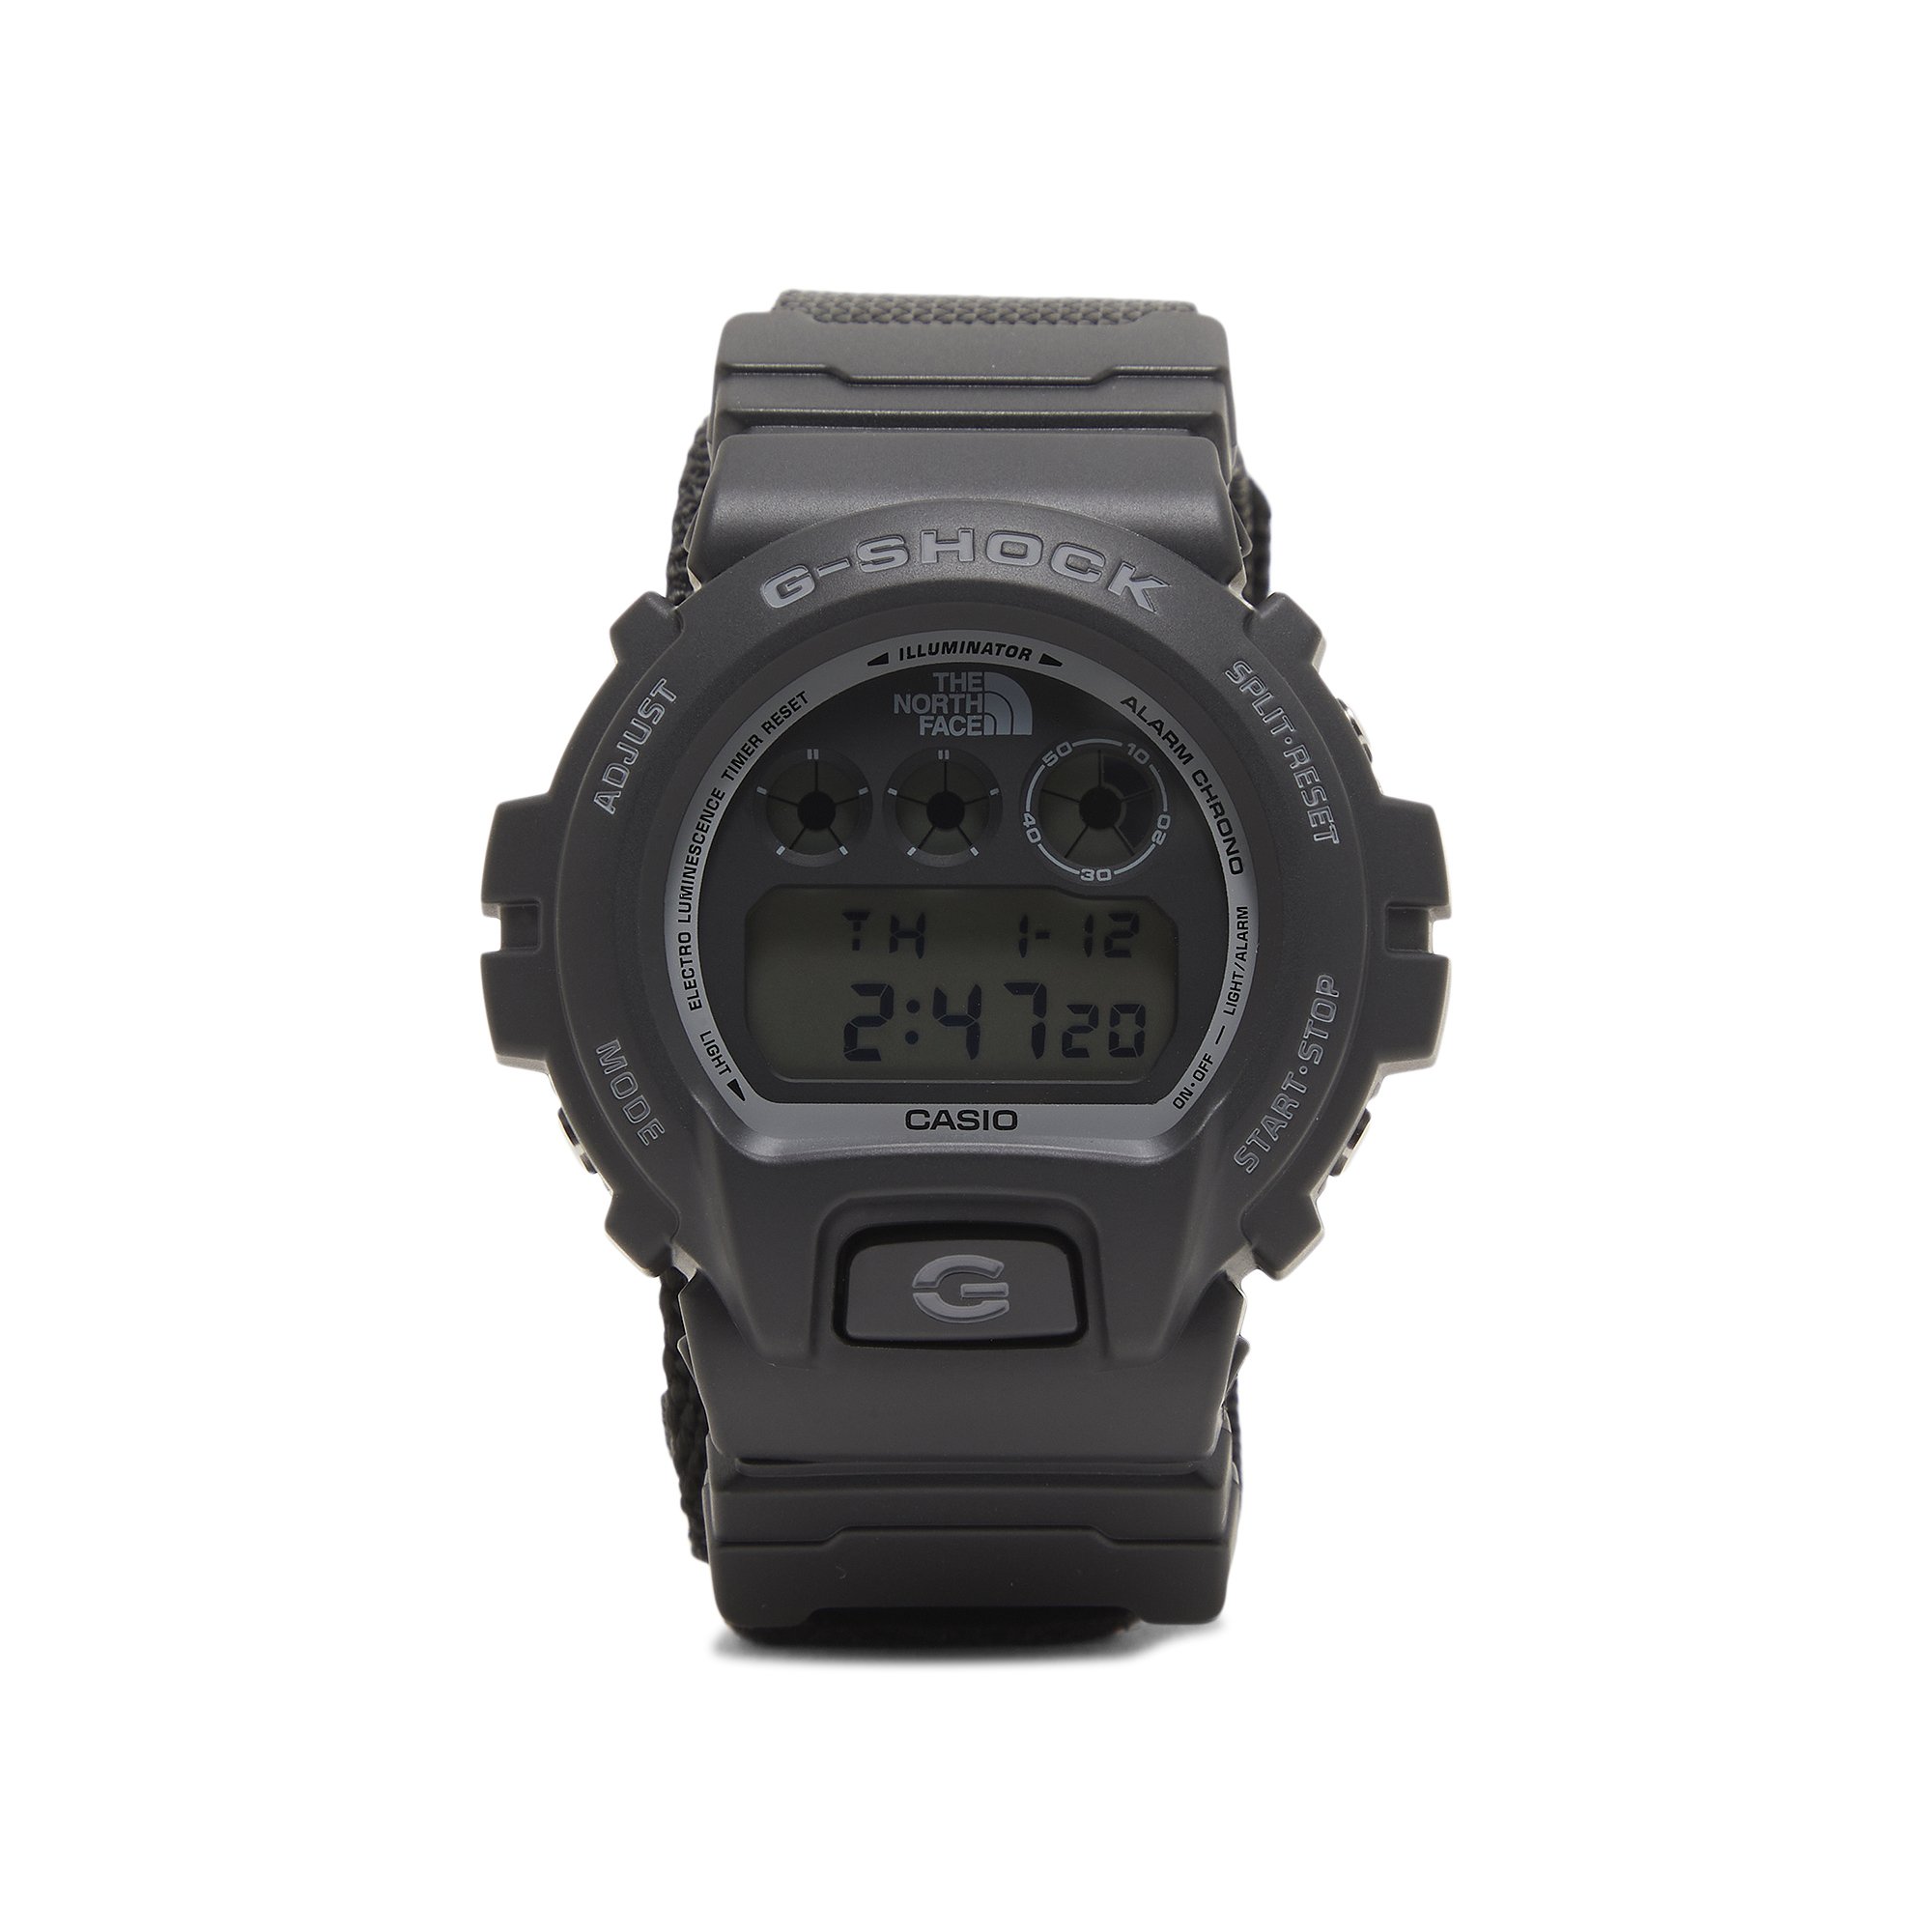 Buy Supreme x The North Face x G-SHOCK Watch 'Black' - FW22A4